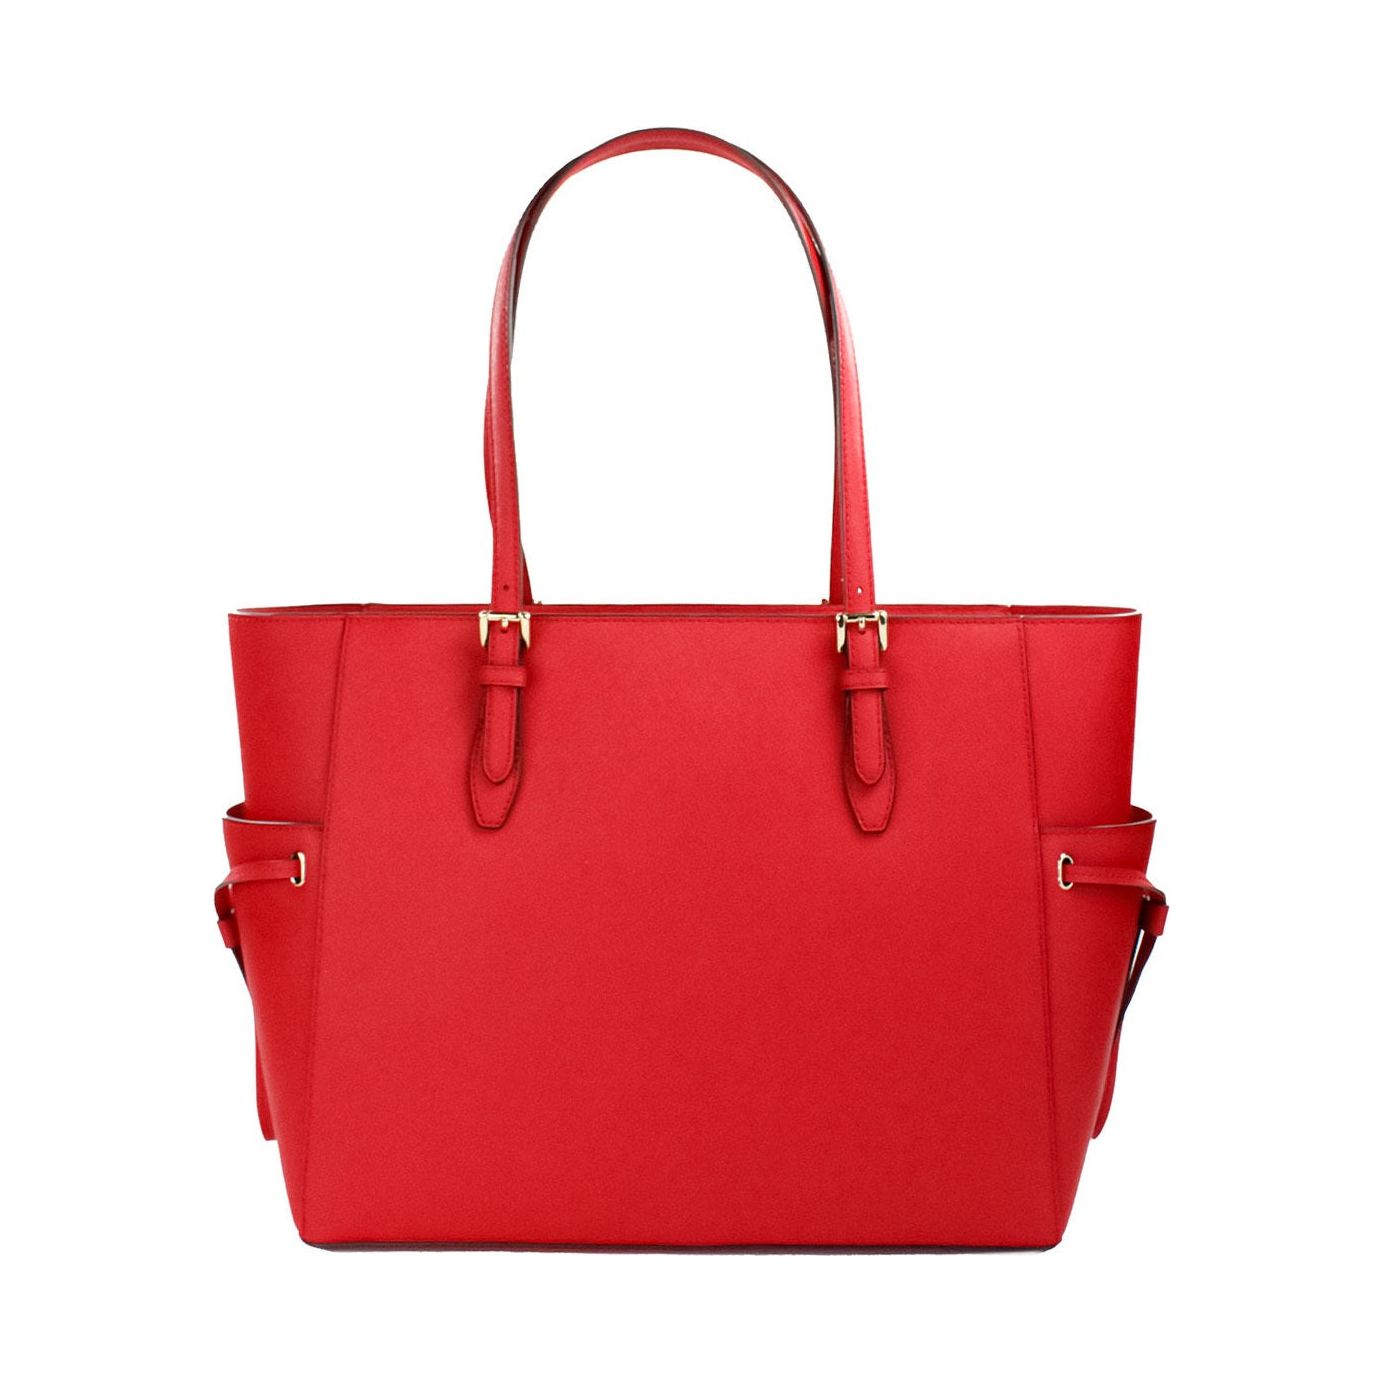 Michael Kors Gilly Large Bright Red Leather Drawstring Travel Tote Bag Purse gilly-large-bright-red-leather-drawstring-travel-tote-bag-purse